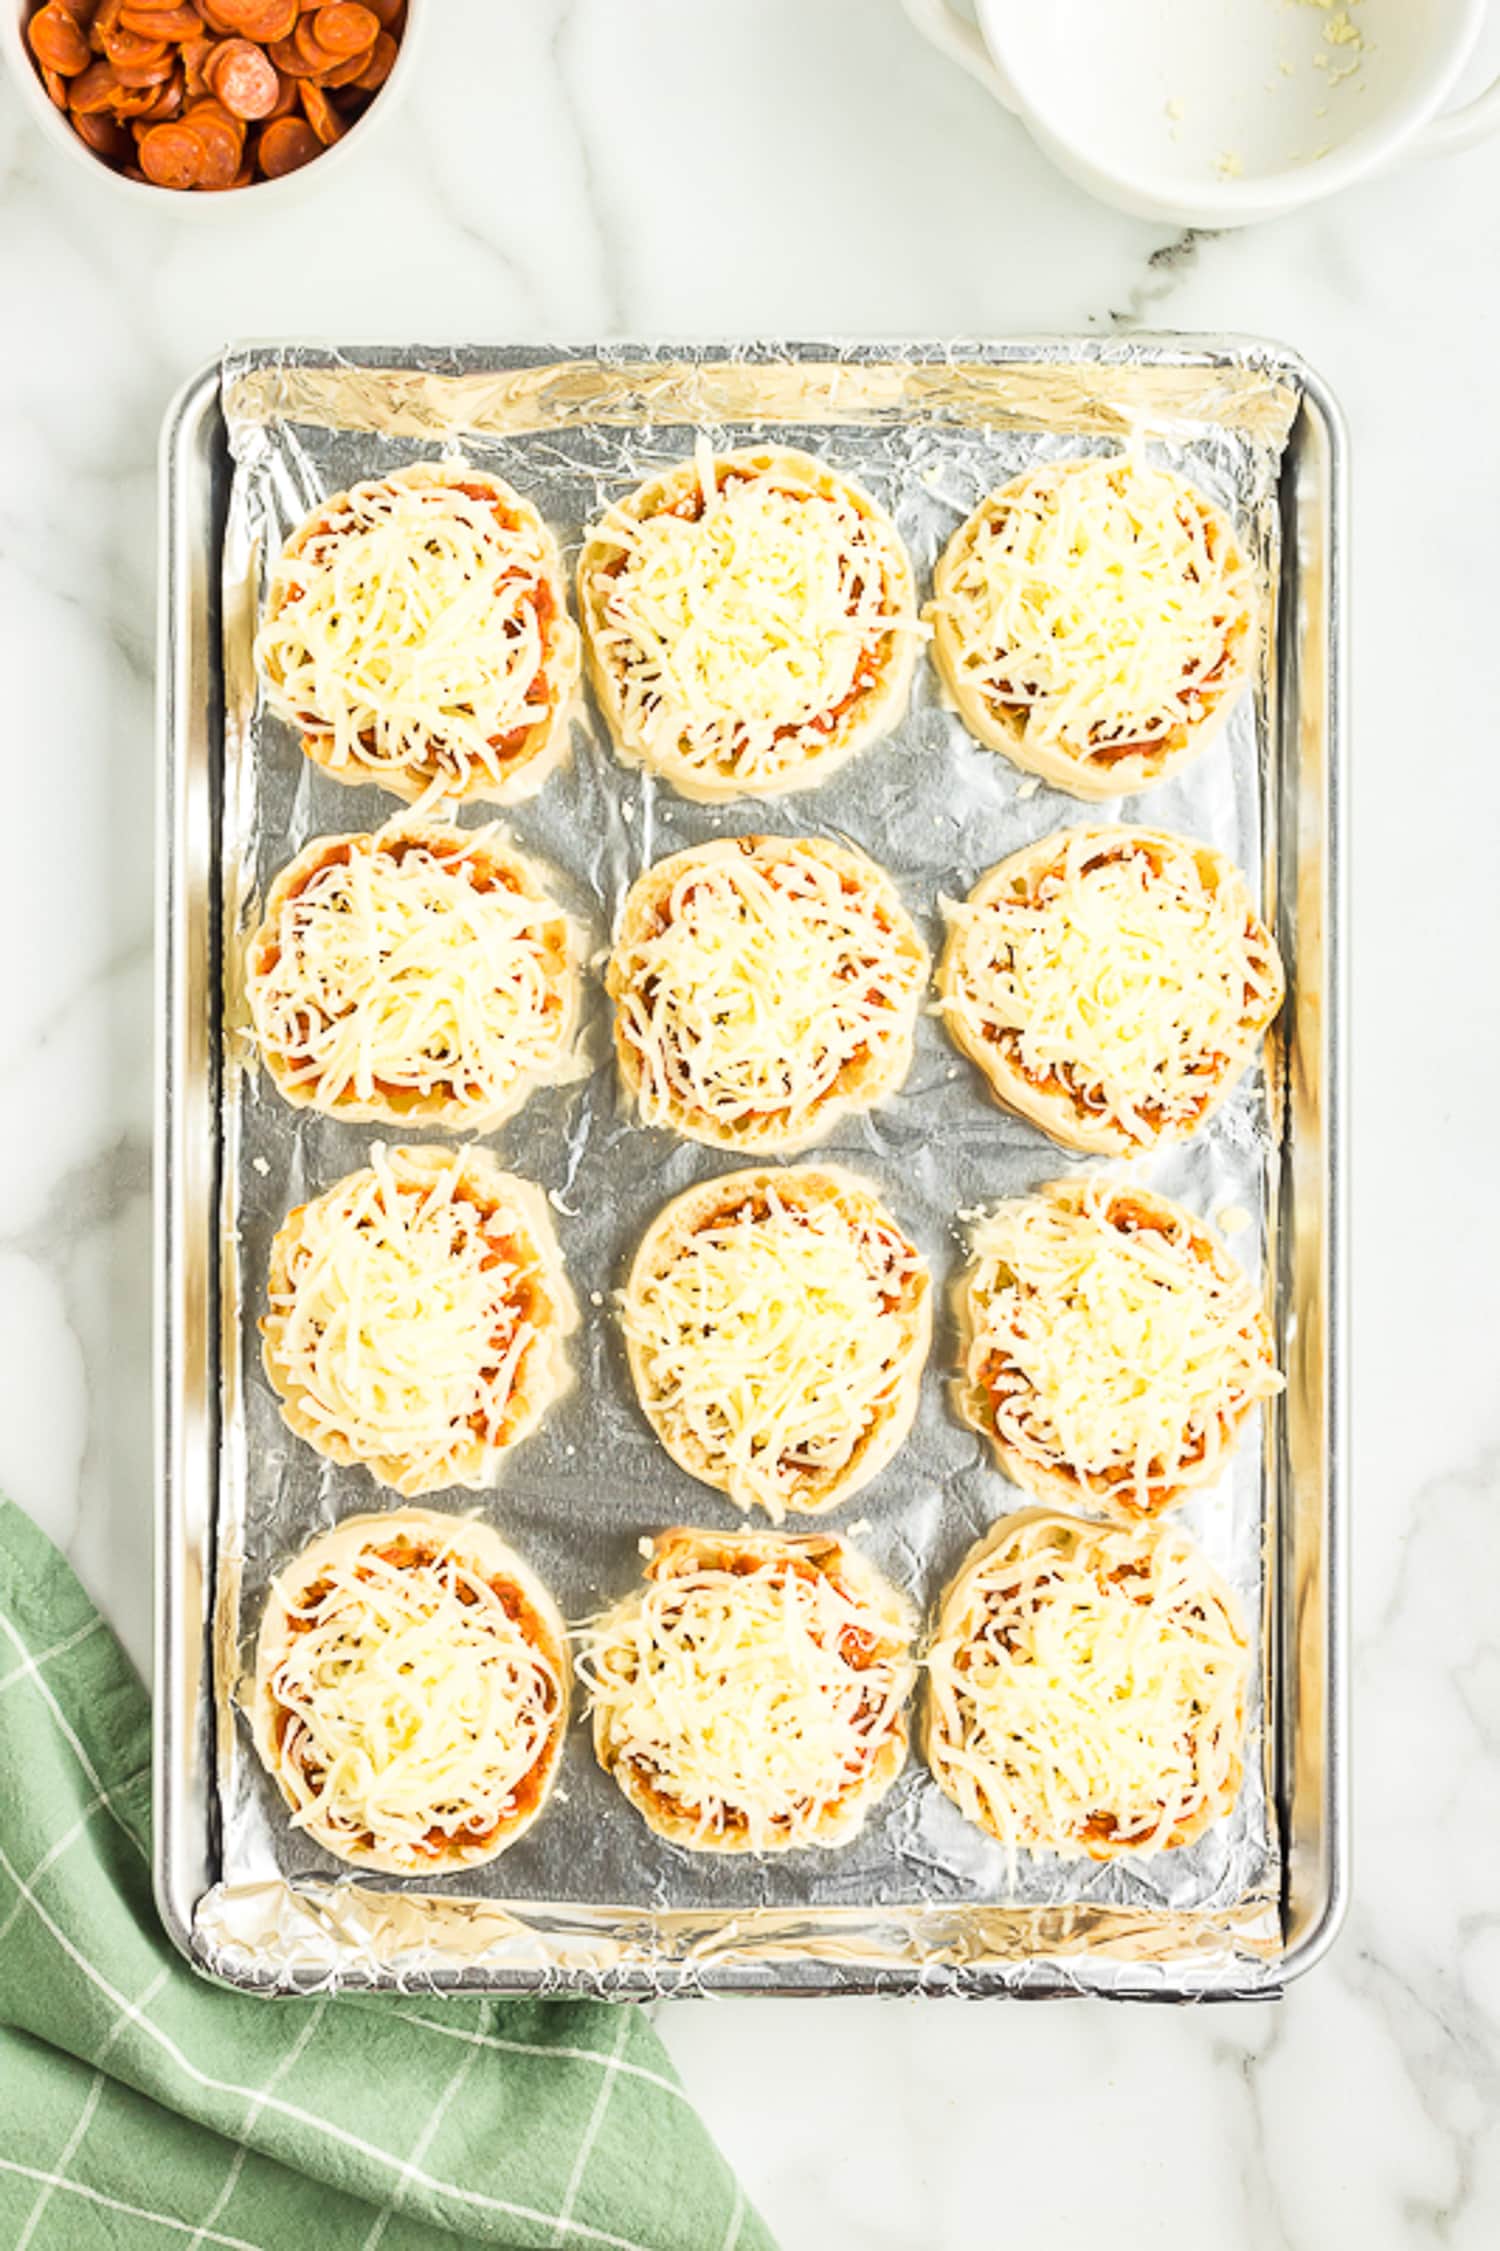 Sheet pan with English muffins topped with Mozzarella cheese